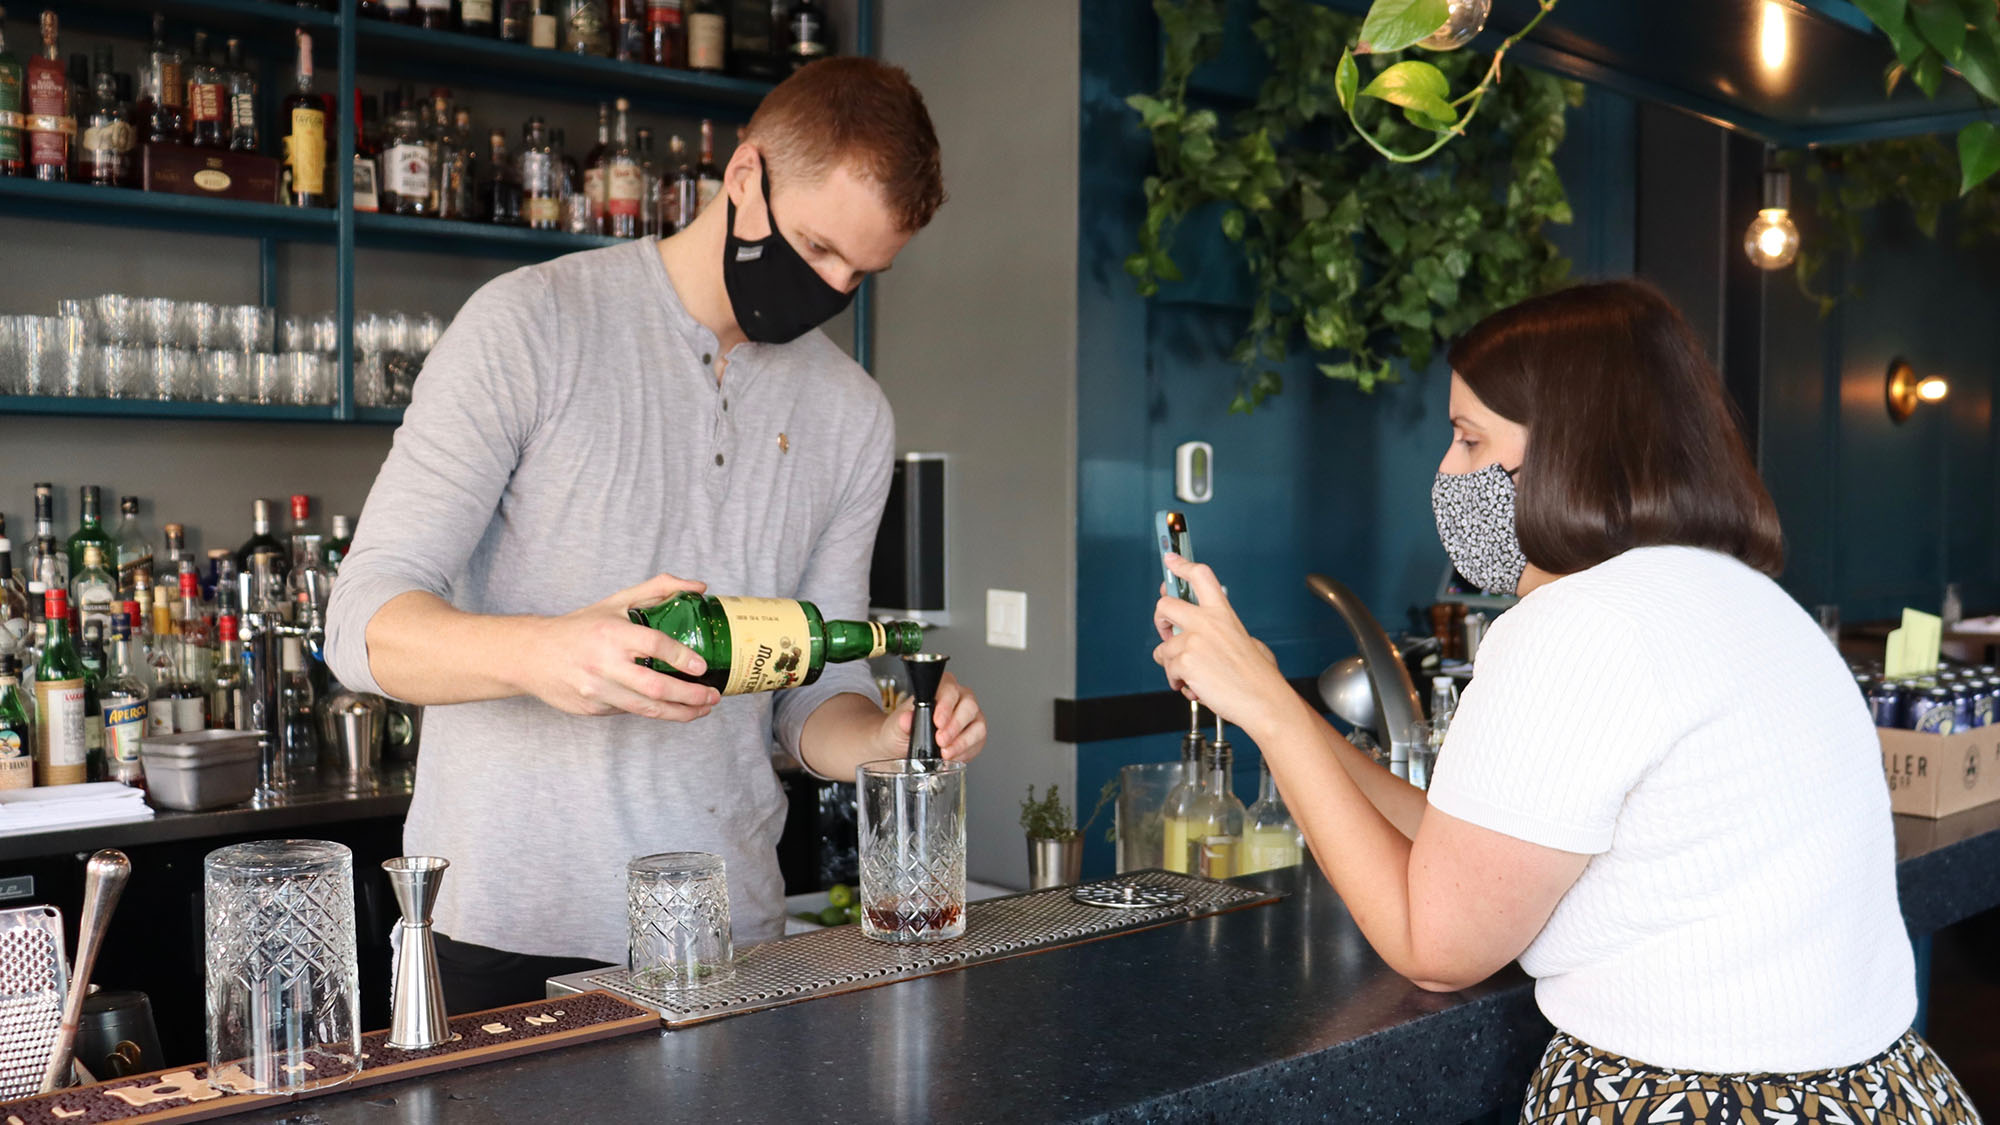 Shannon MacIntyre took videos of Julep Restaurant’s bartender making a cocktail for a photoshoot on Oct. 9. MacIntyre makes the restaurant’s Instagram content.